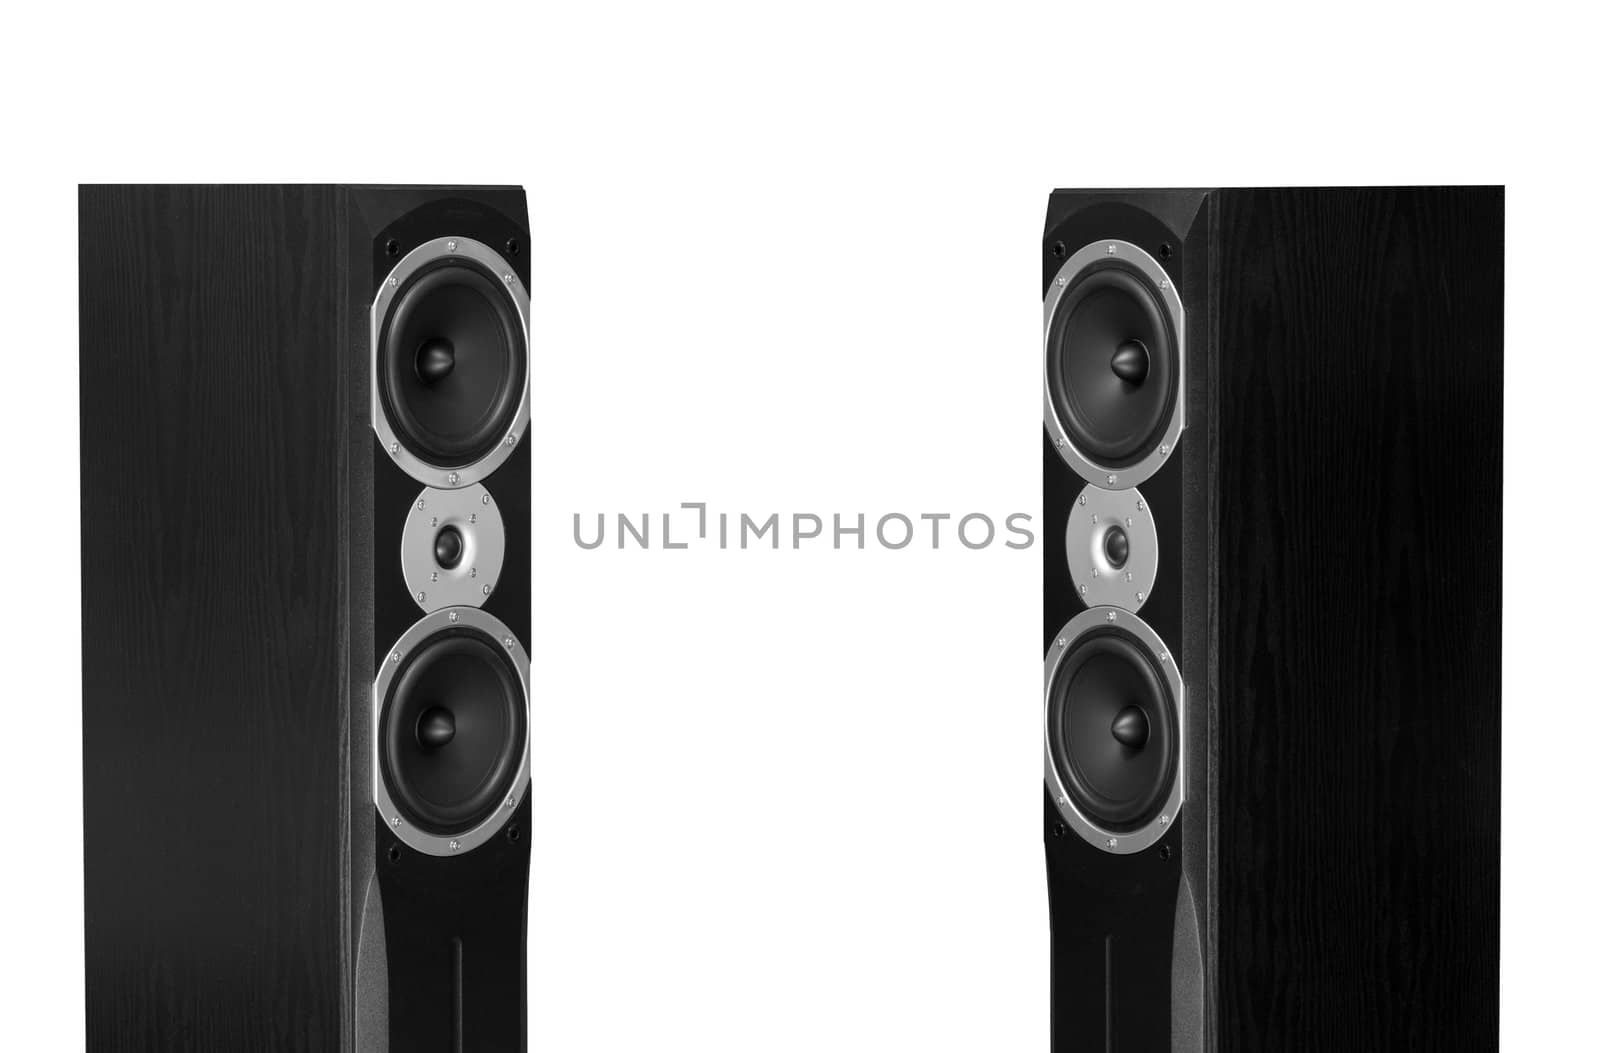 Audiophile speakers. two pieces on a white background